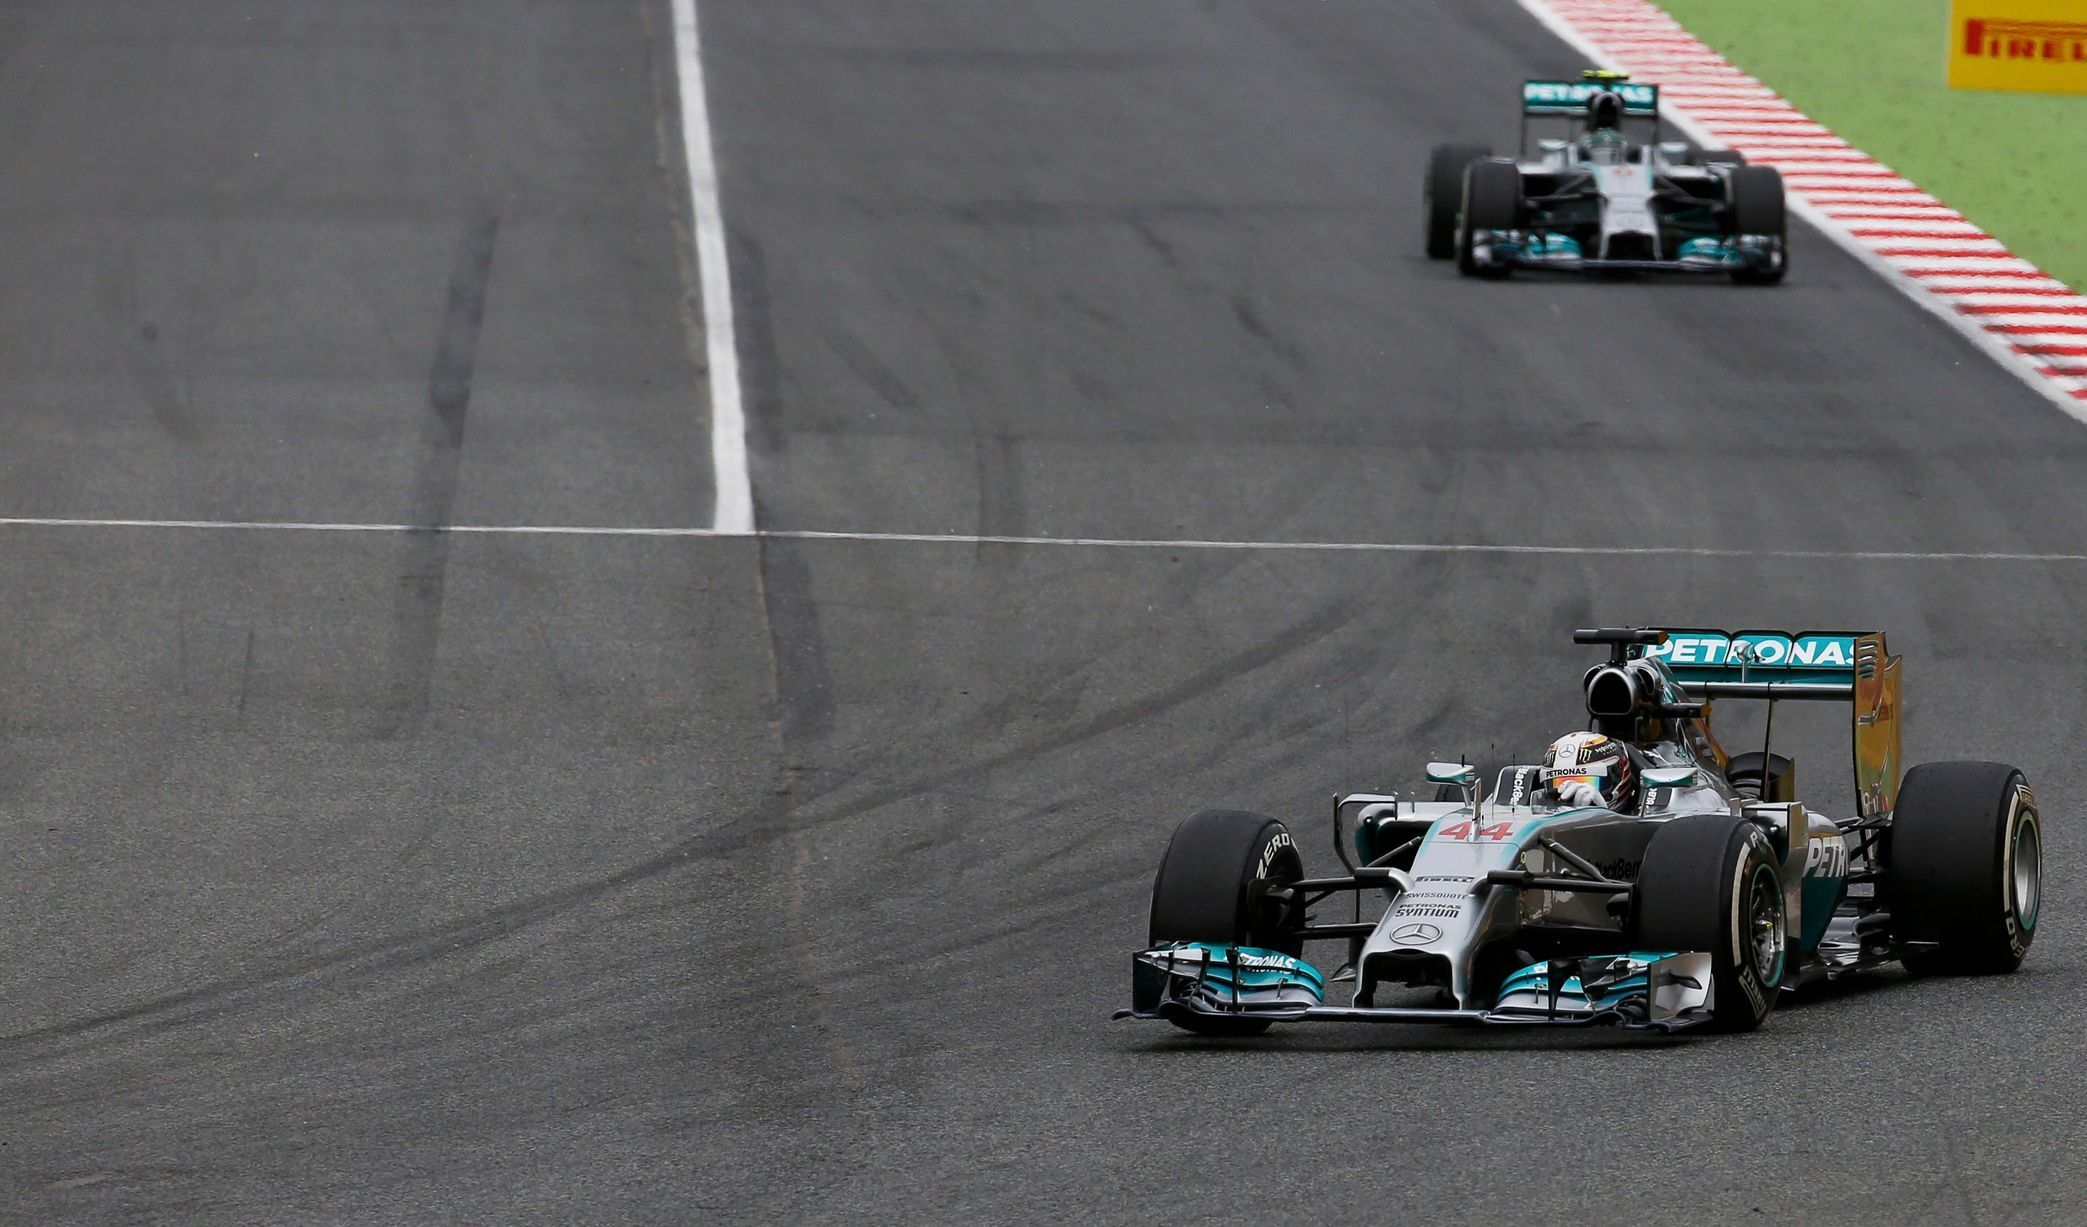 Mercedes Formula One driver Hamilton of Britain drives during the Spanish F1 Grand Prix at the Barcelona-Catalunya Circuit in Montmelo